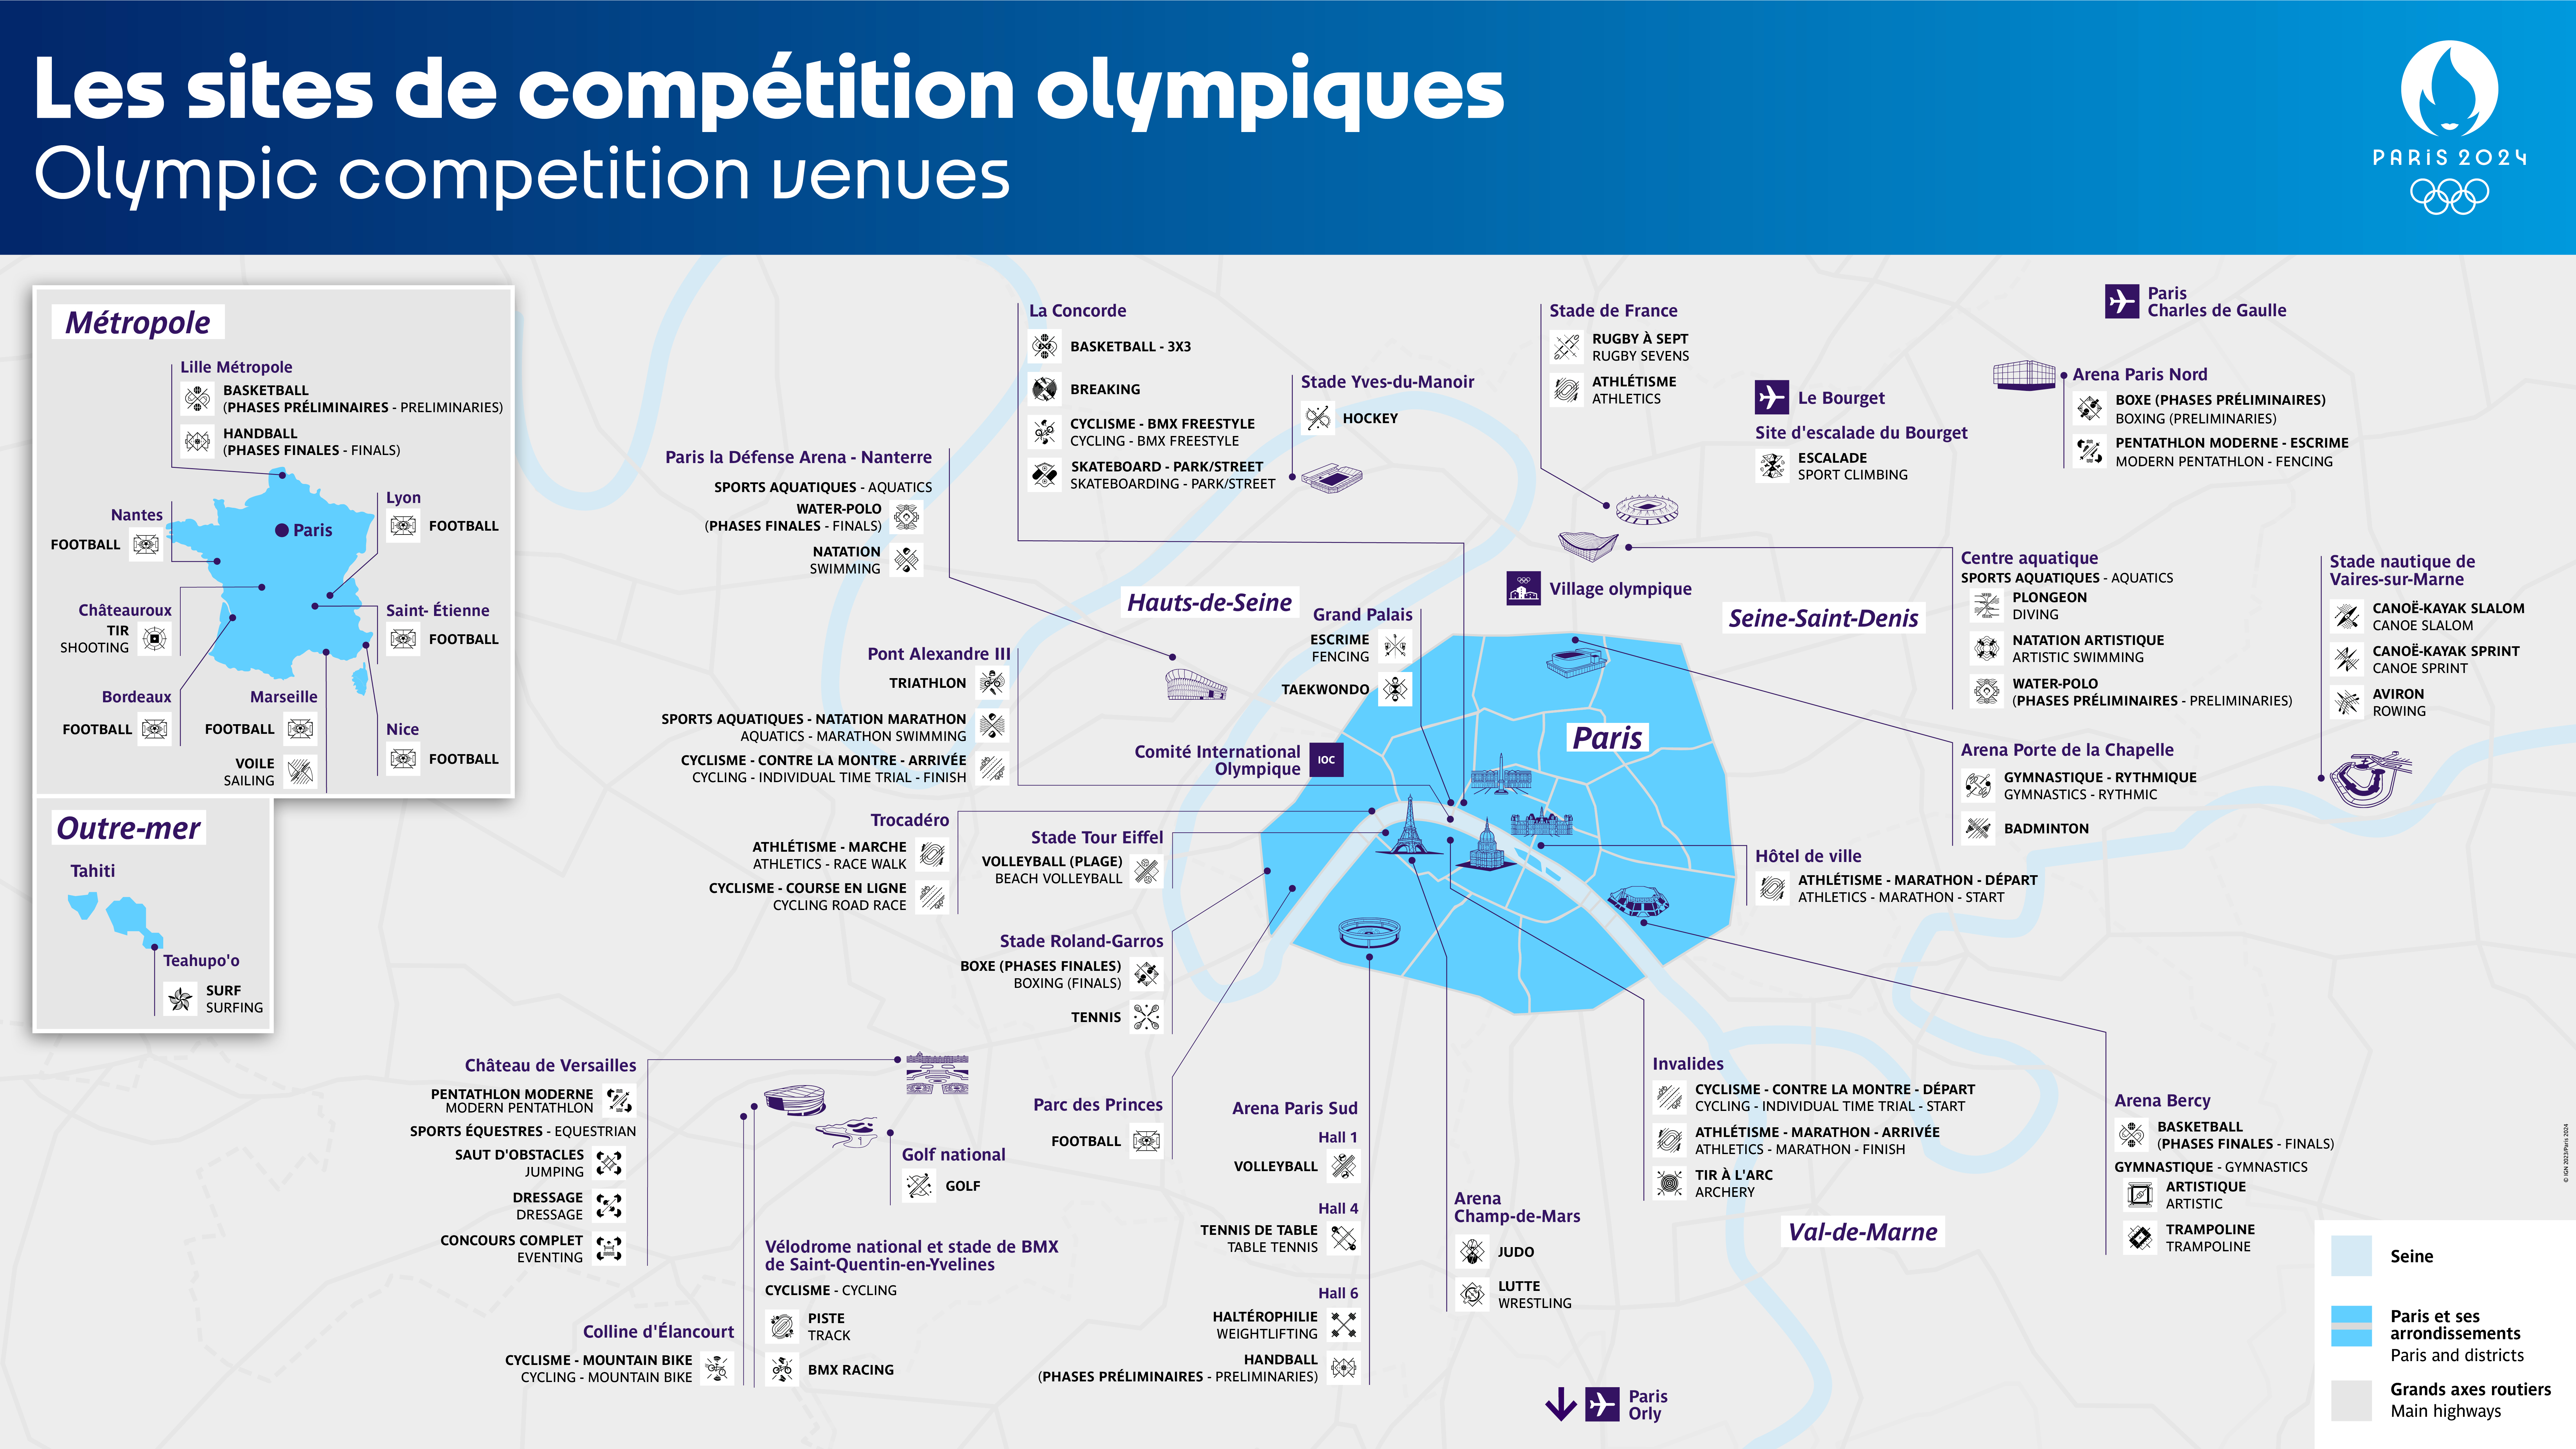 Map - Olympic competition venues.jpg (6.05 MB)